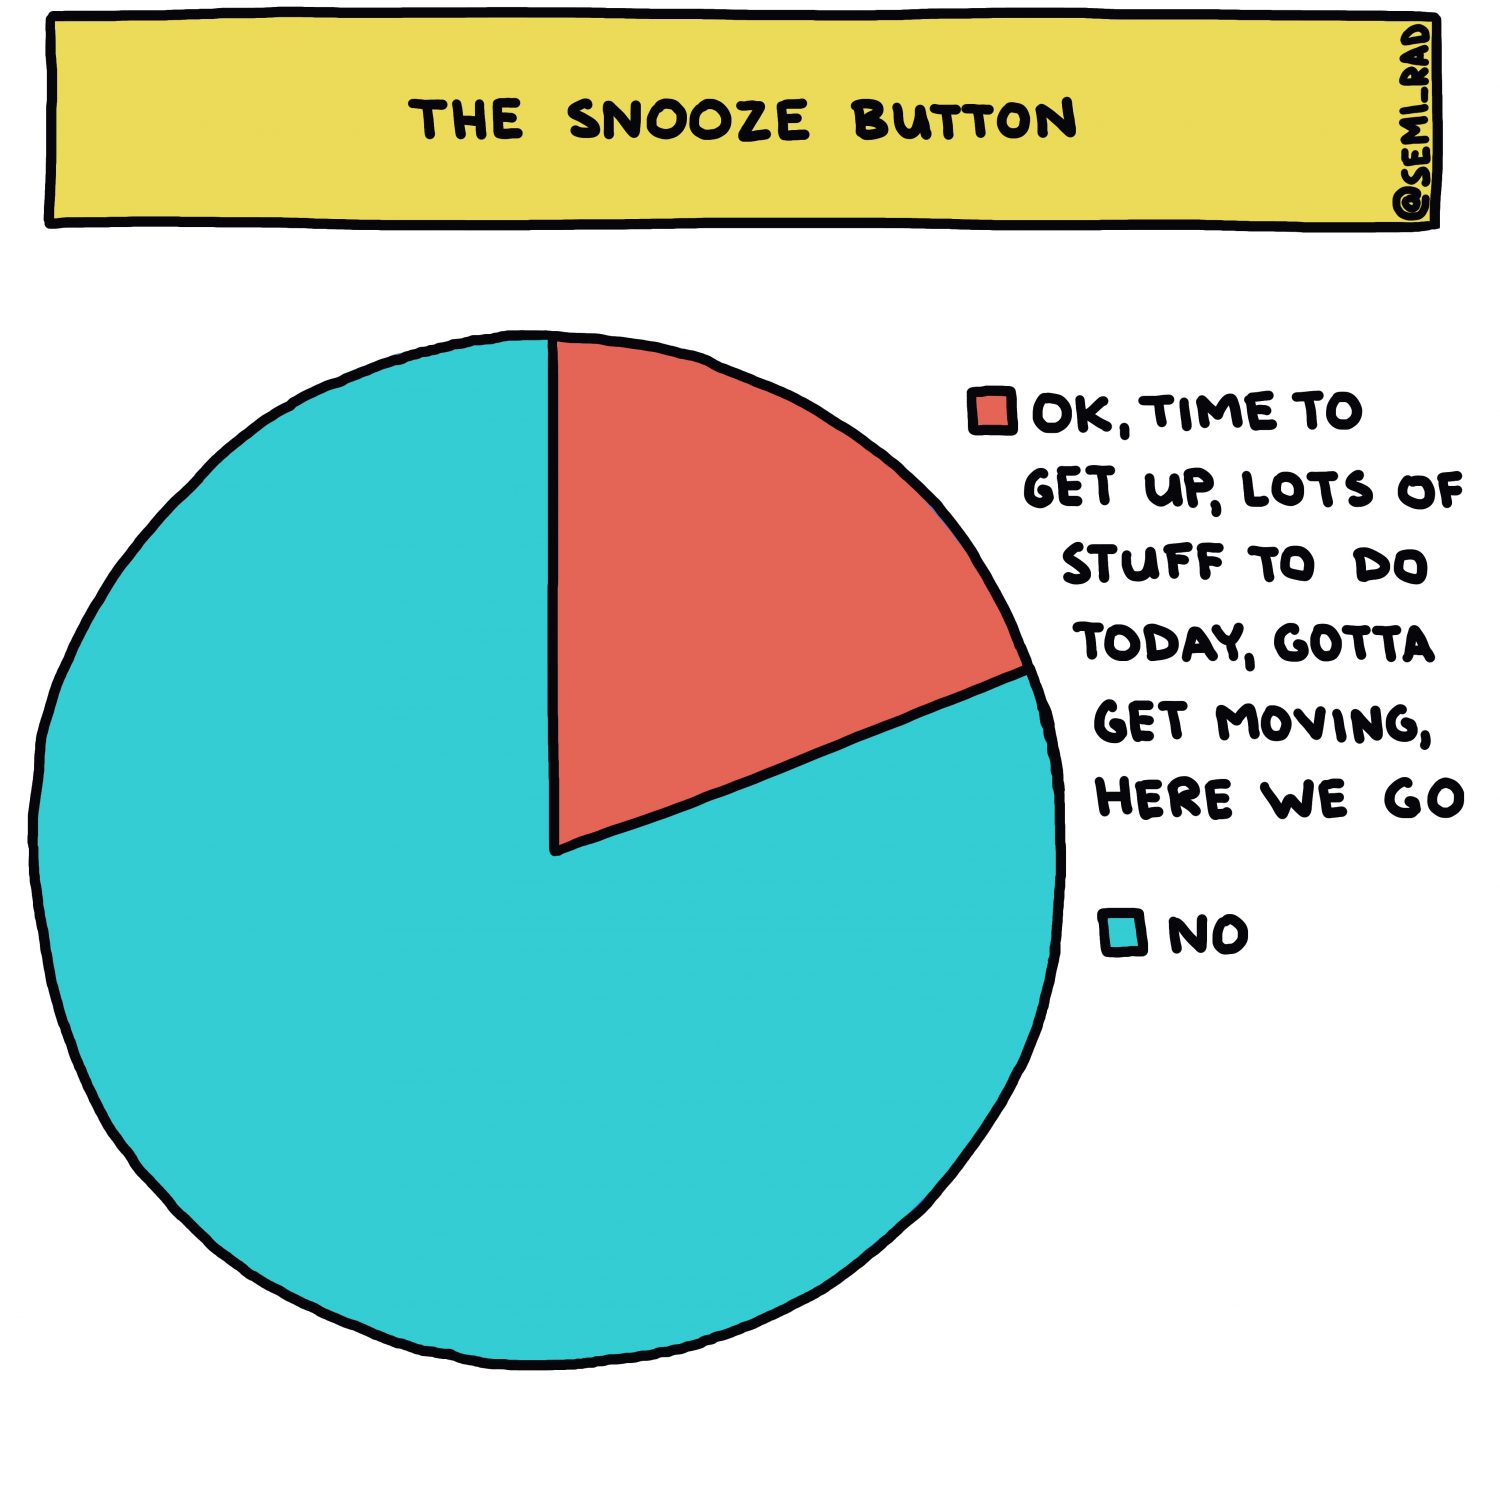 The Snooze Button